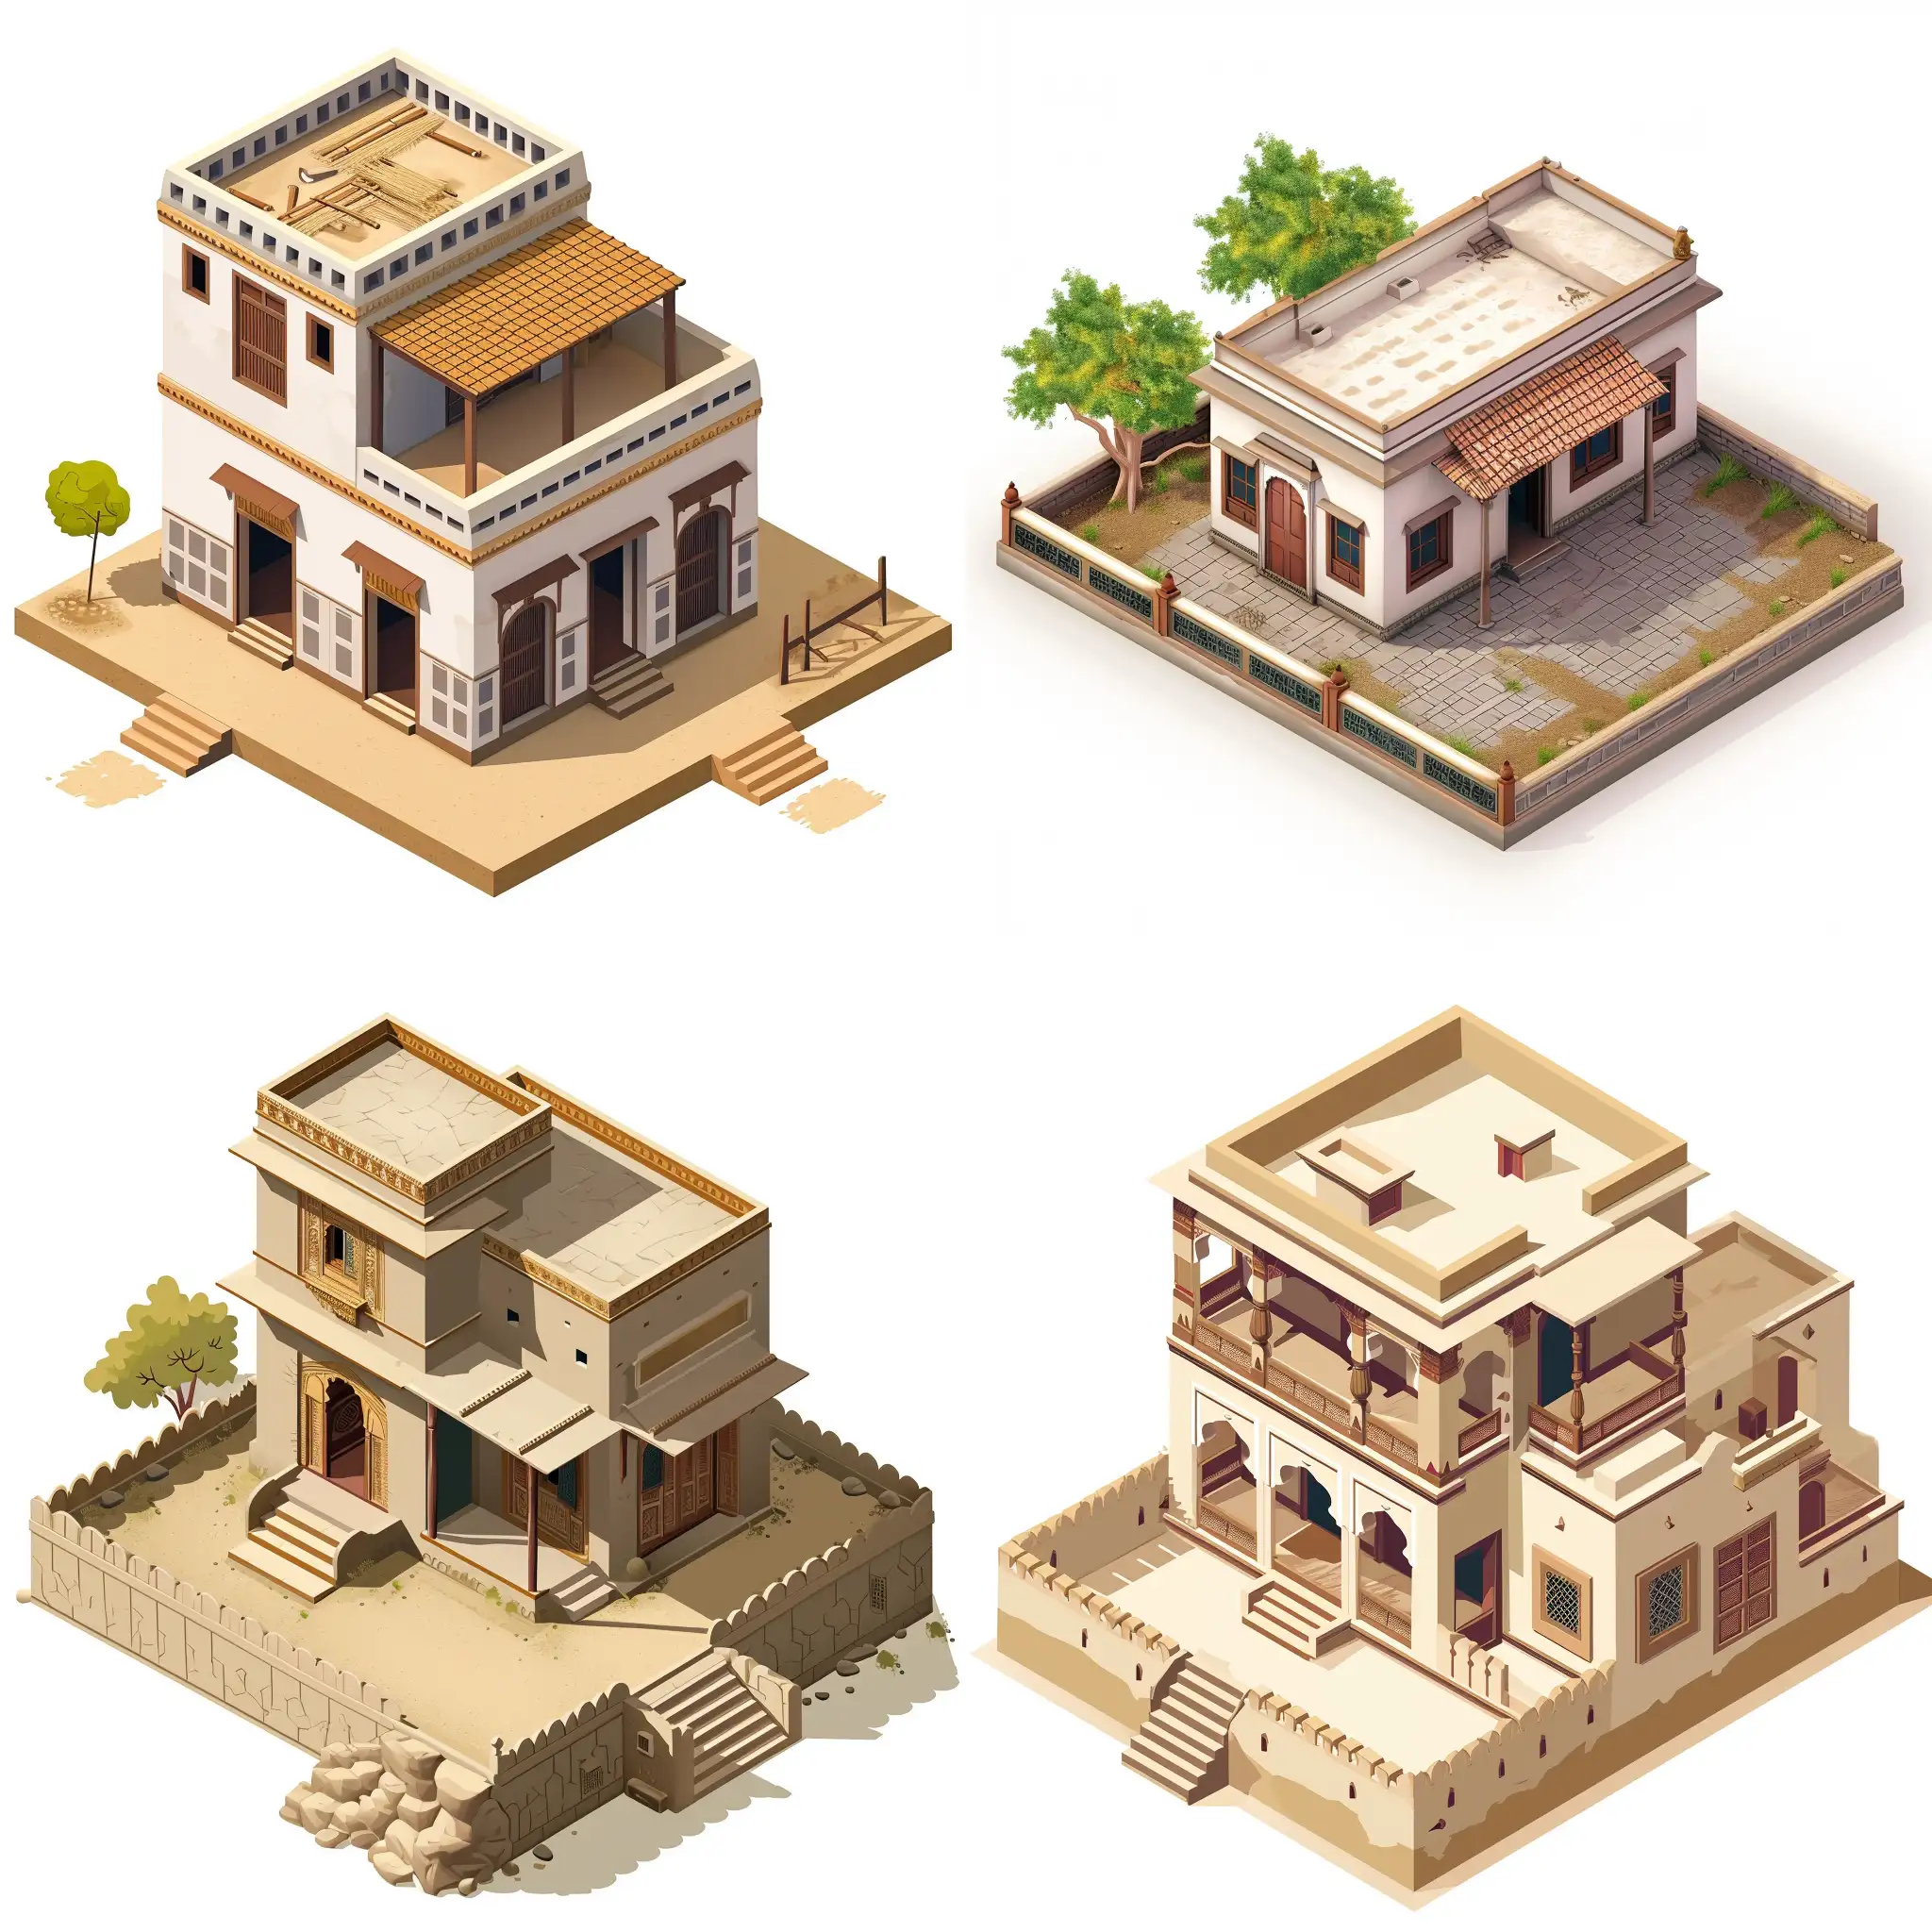 A traditional Indian house from 1800s, isometric view